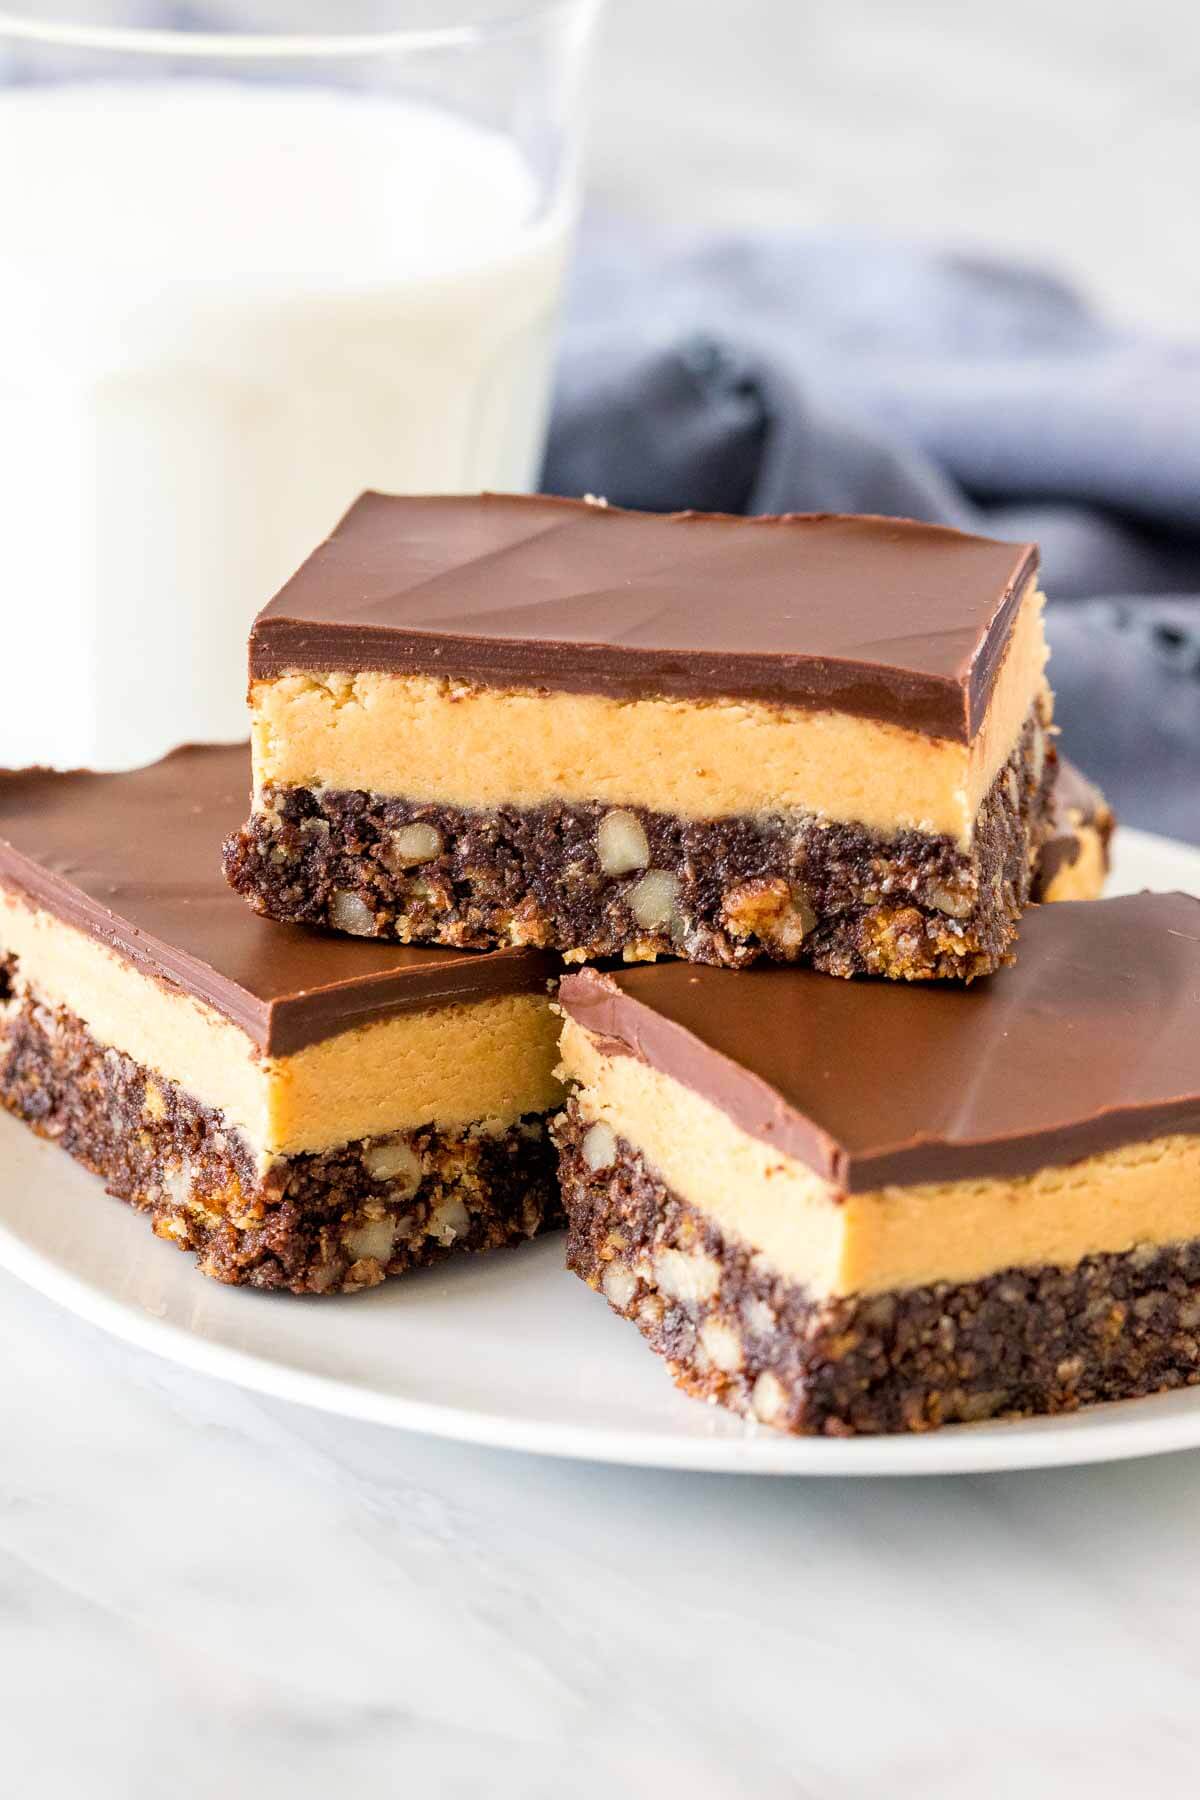 Plate of peanut butter nanaimo bars with a glass of milk